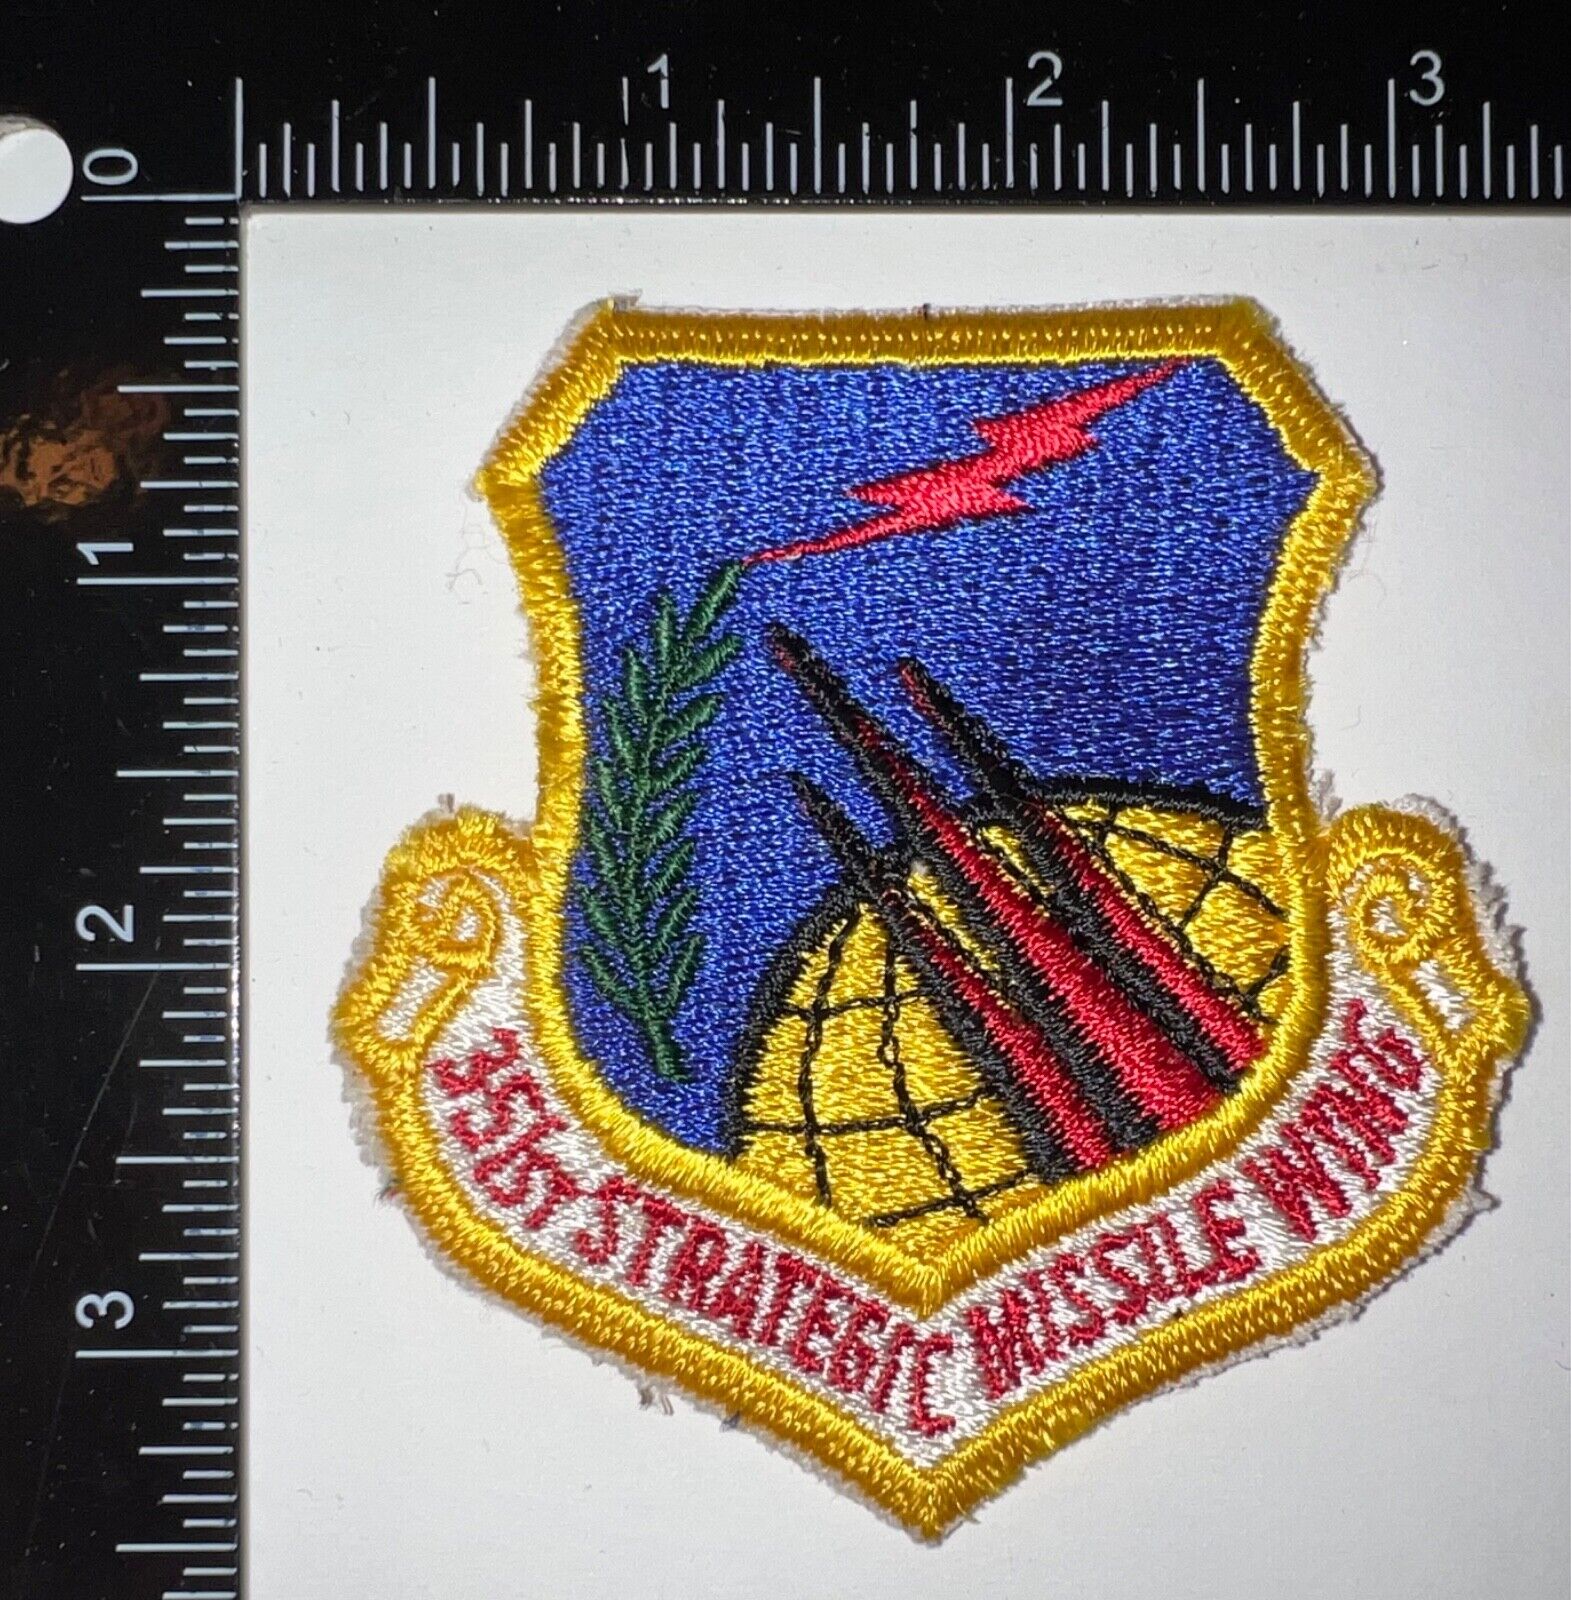 Cold War USAF US Air Force 351st Strategic Missile Wing Patch